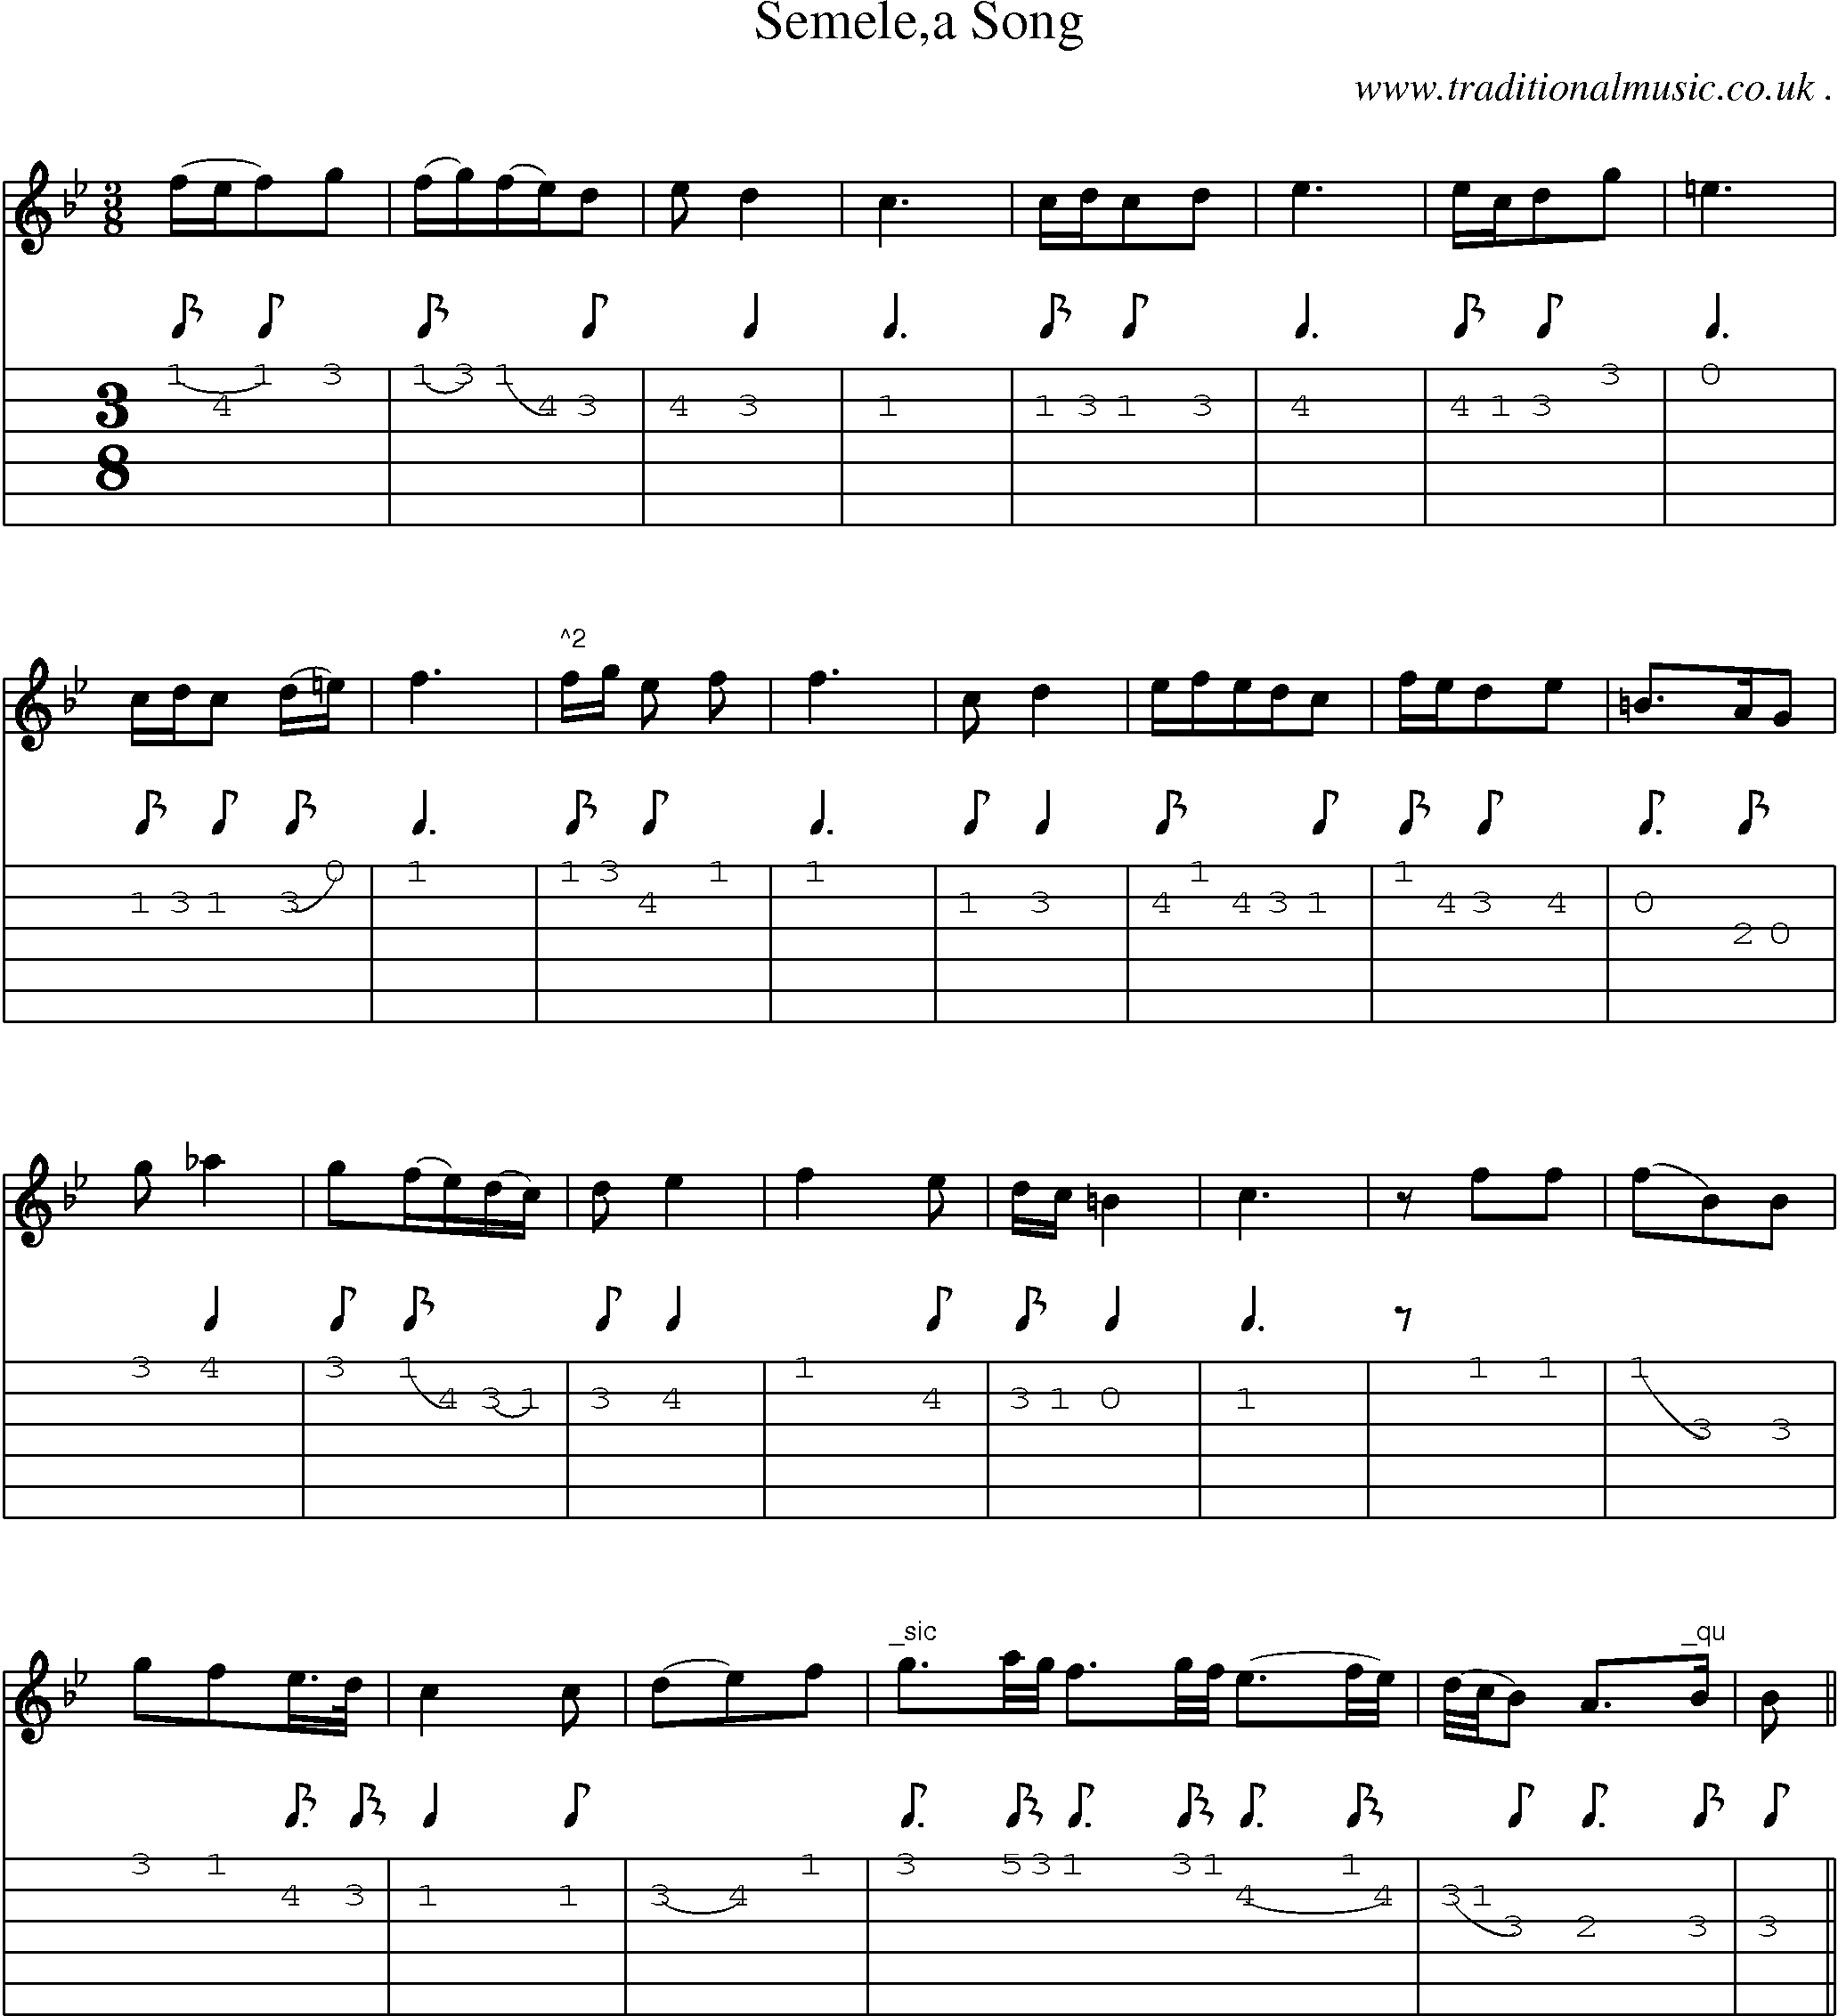 Sheet-Music and Guitar Tabs for Semelea Song